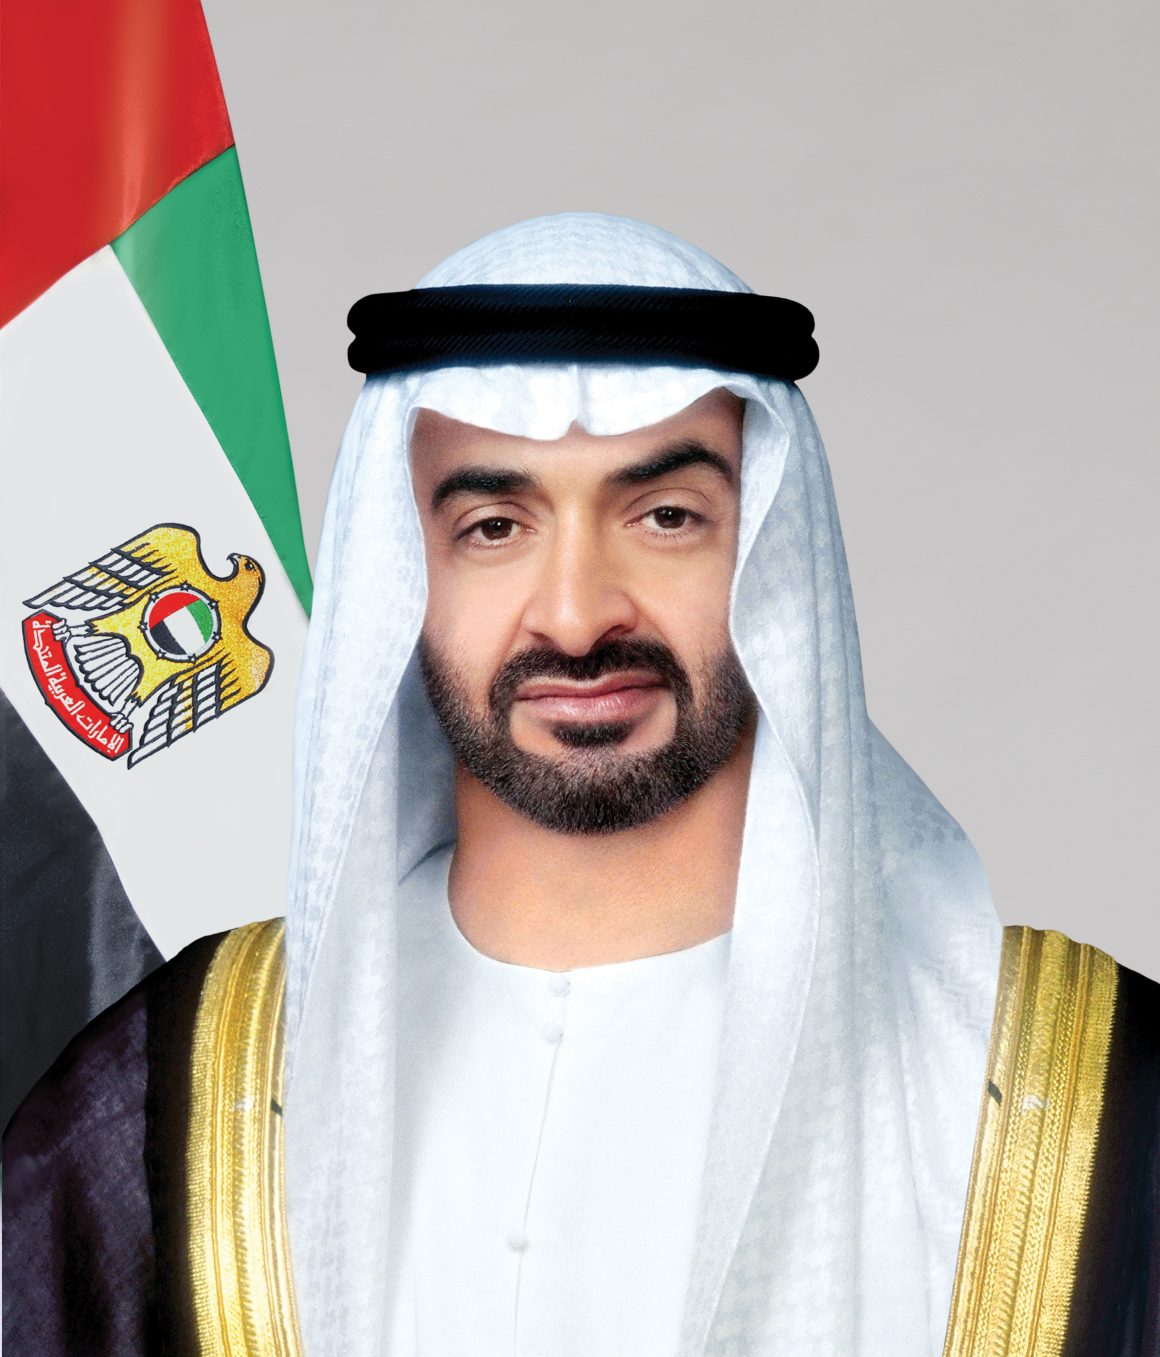 Under UAE President’s directives, Abu Dhabi International Airport to be renamed Zayed International Airport